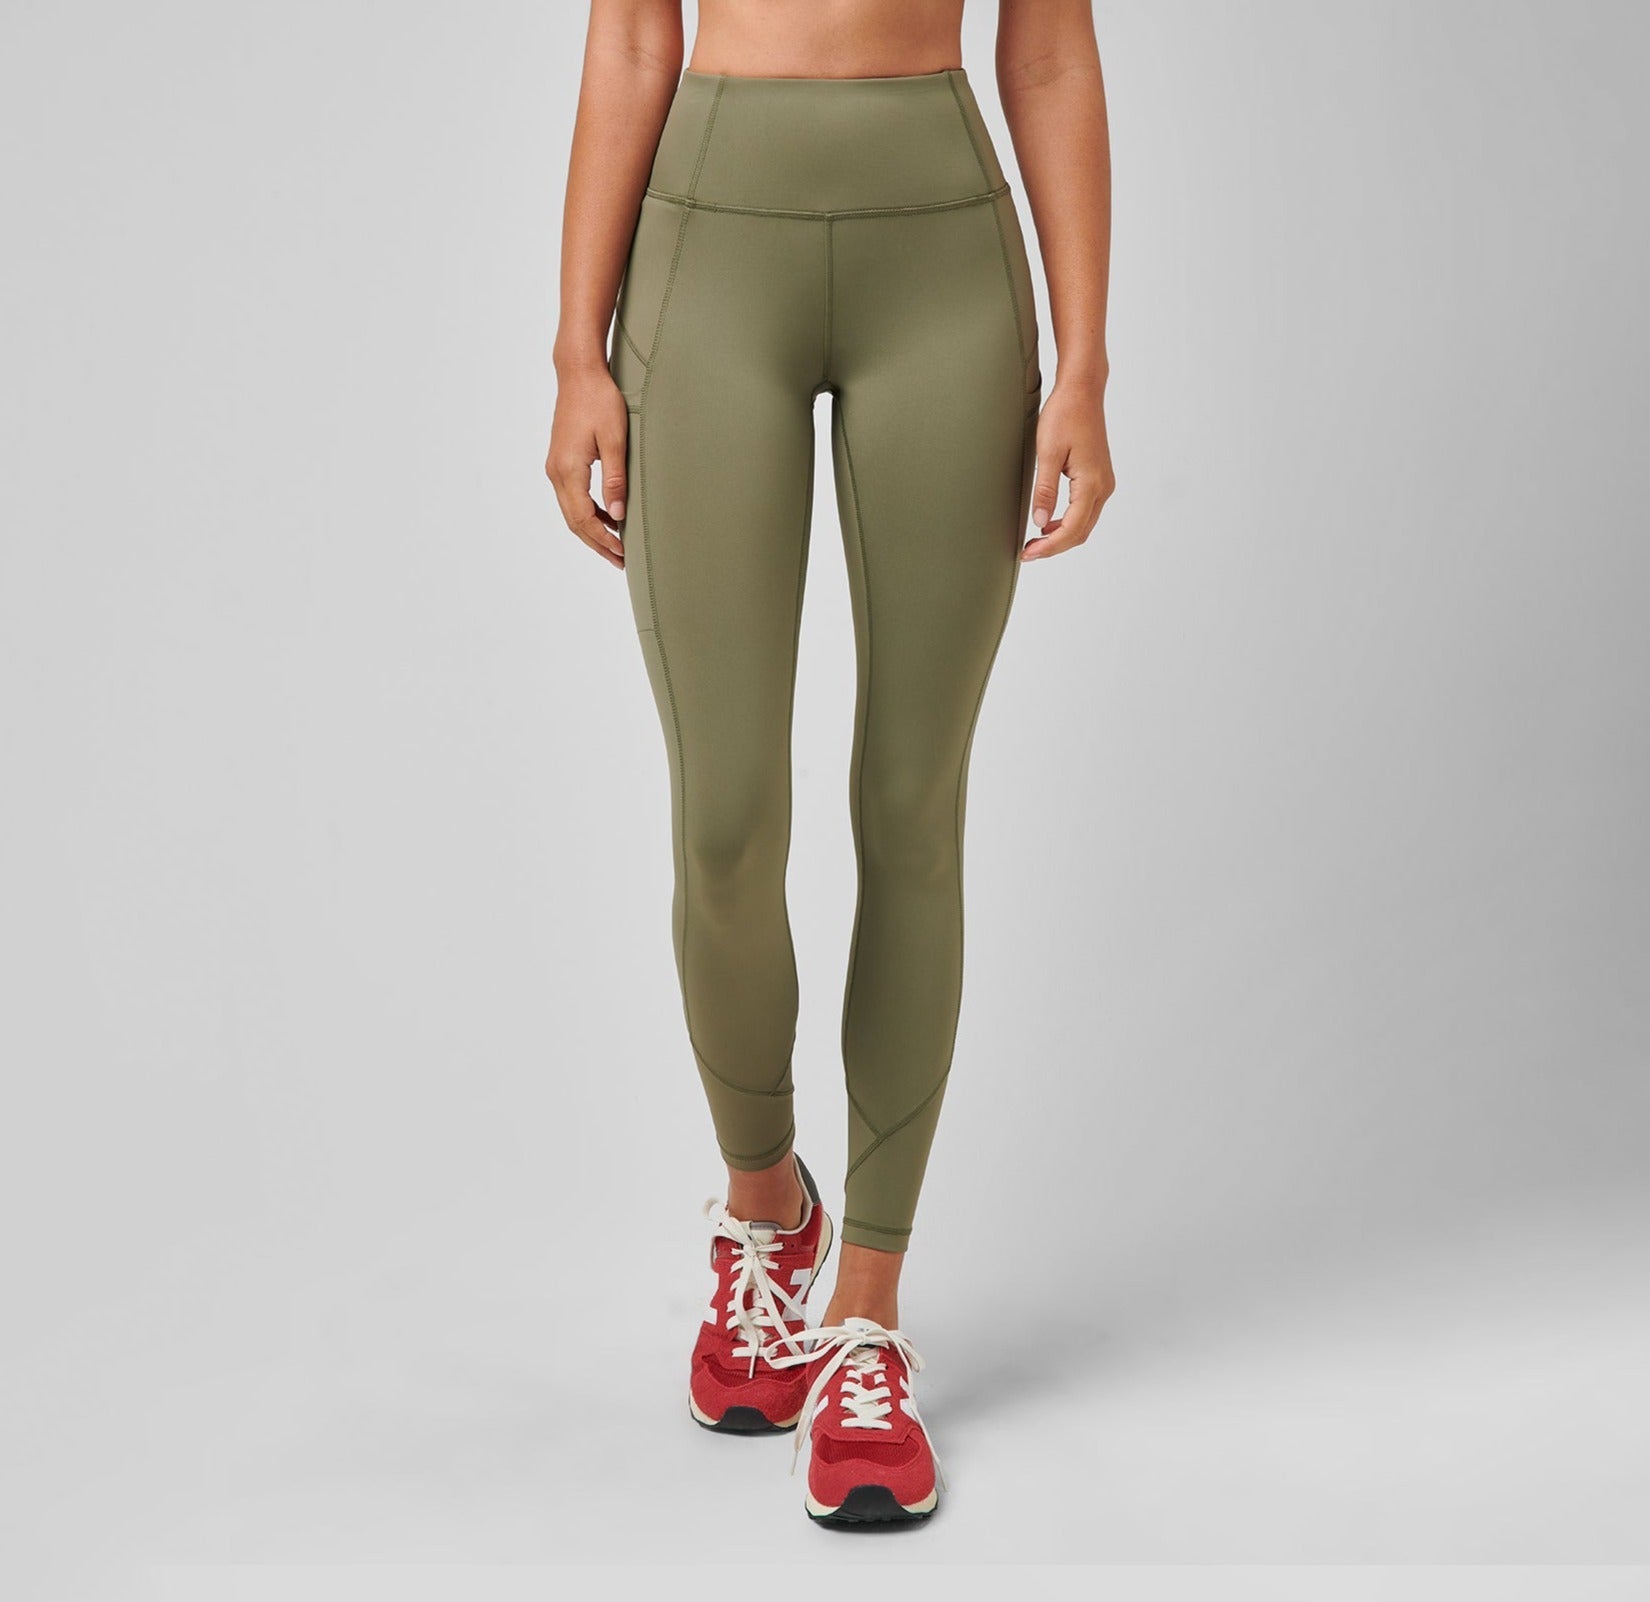 HIGH OUTPUT SPORTS LEGGING Slate Green – Greatness Wins